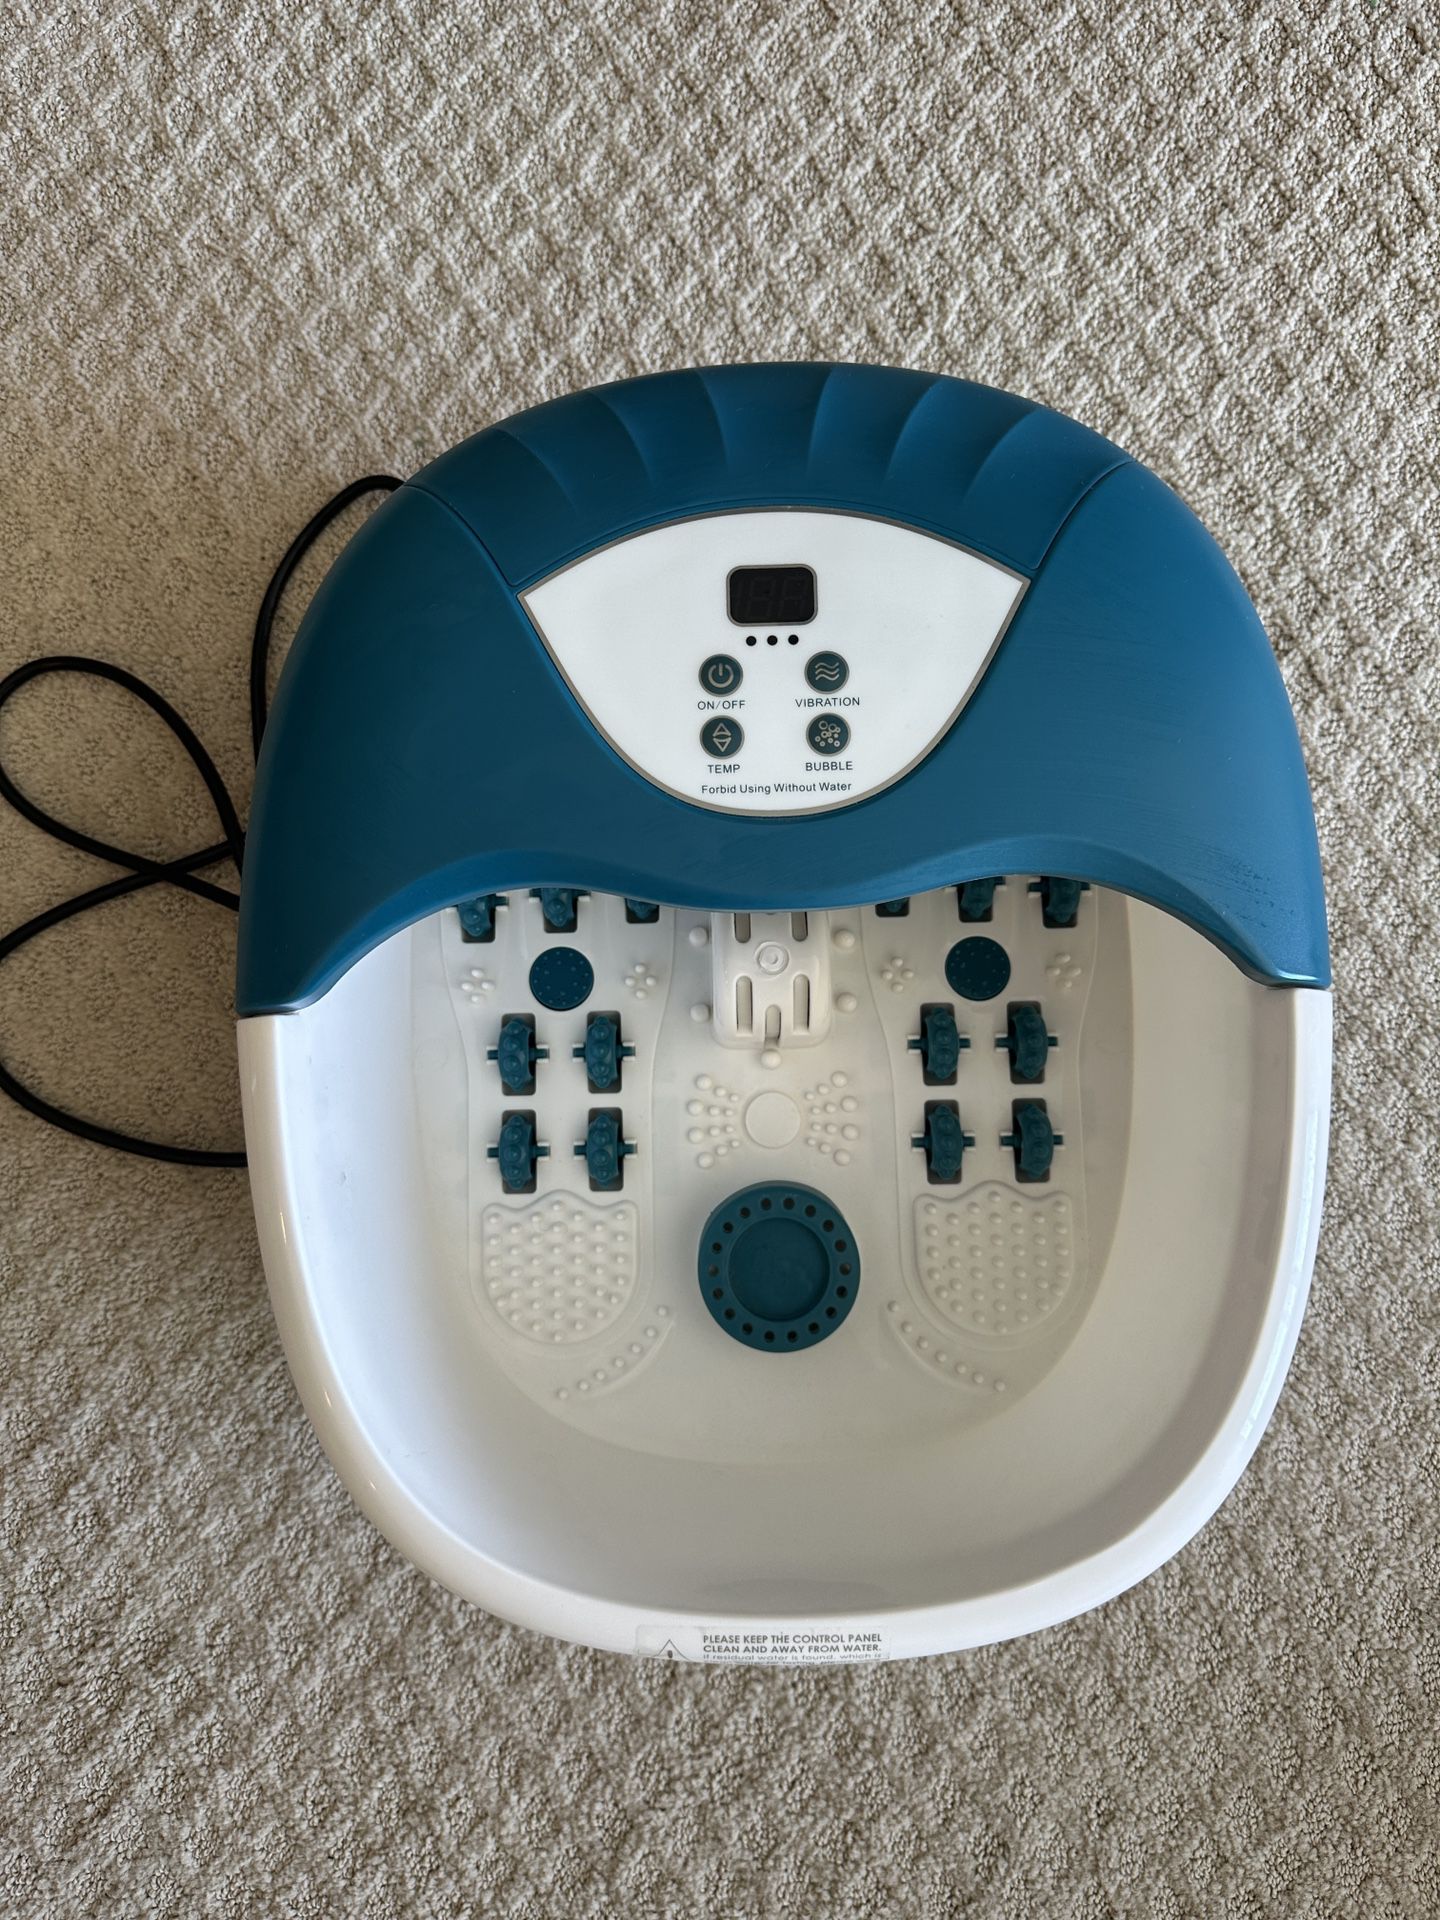 4 In 1 Foot Spa Massager 